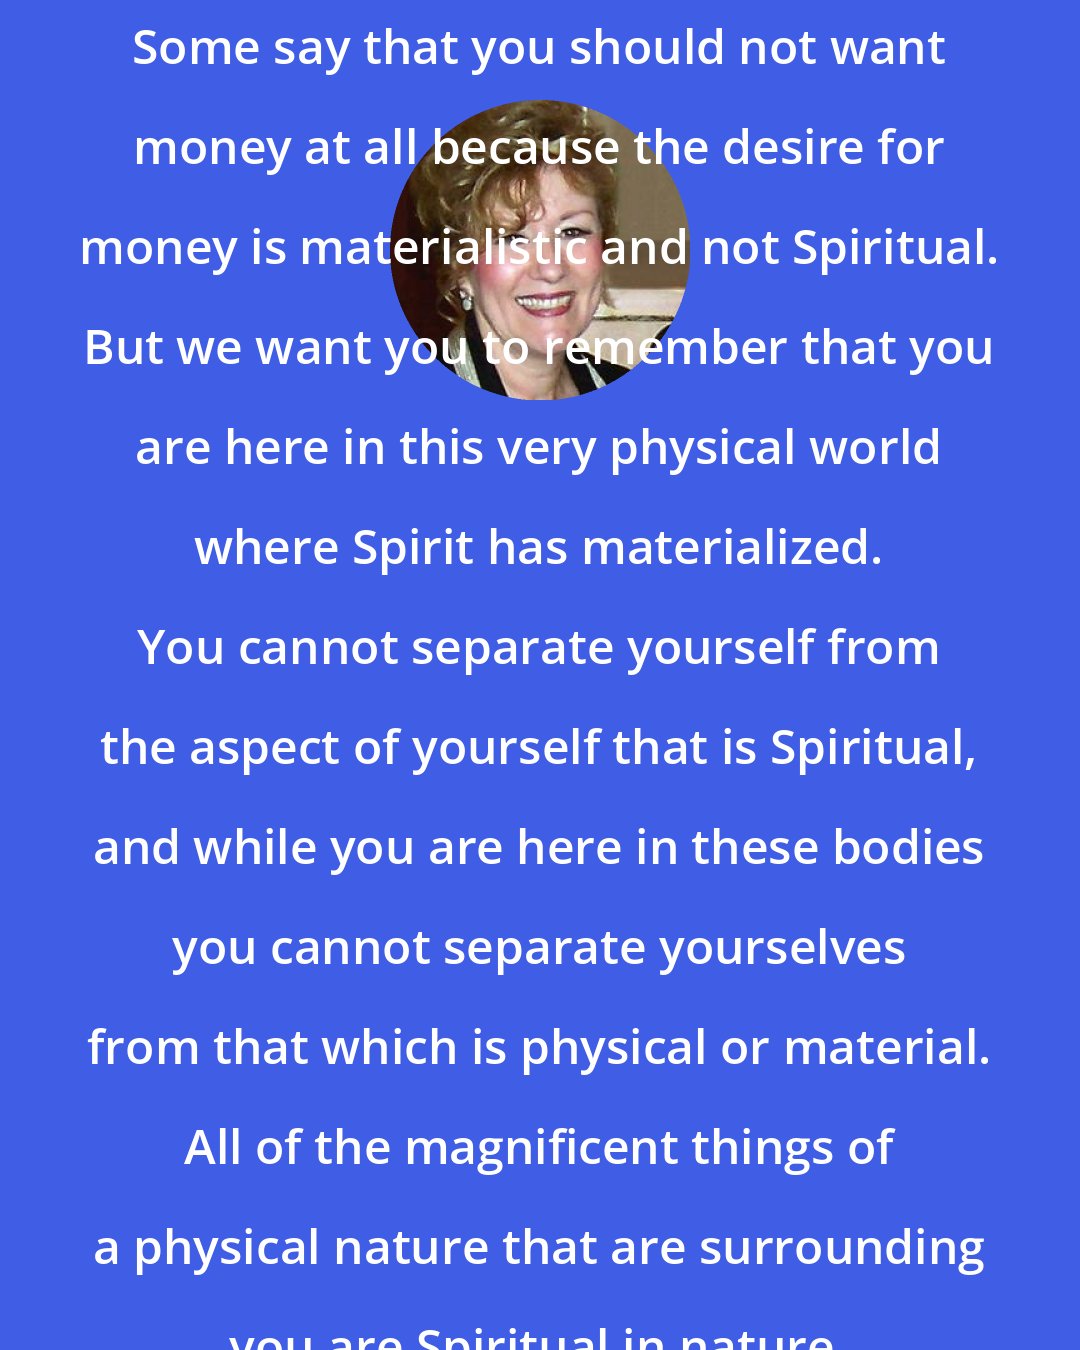 Esther Hicks: Some say that you should not want money at all because the desire for money is materialistic and not Spiritual. But we want you to remember that you are here in this very physical world where Spirit has materialized. You cannot separate yourself from the aspect of yourself that is Spiritual, and while you are here in these bodies you cannot separate yourselves from that which is physical or material. All of the magnificent things of a physical nature that are surrounding you are Spiritual in nature.